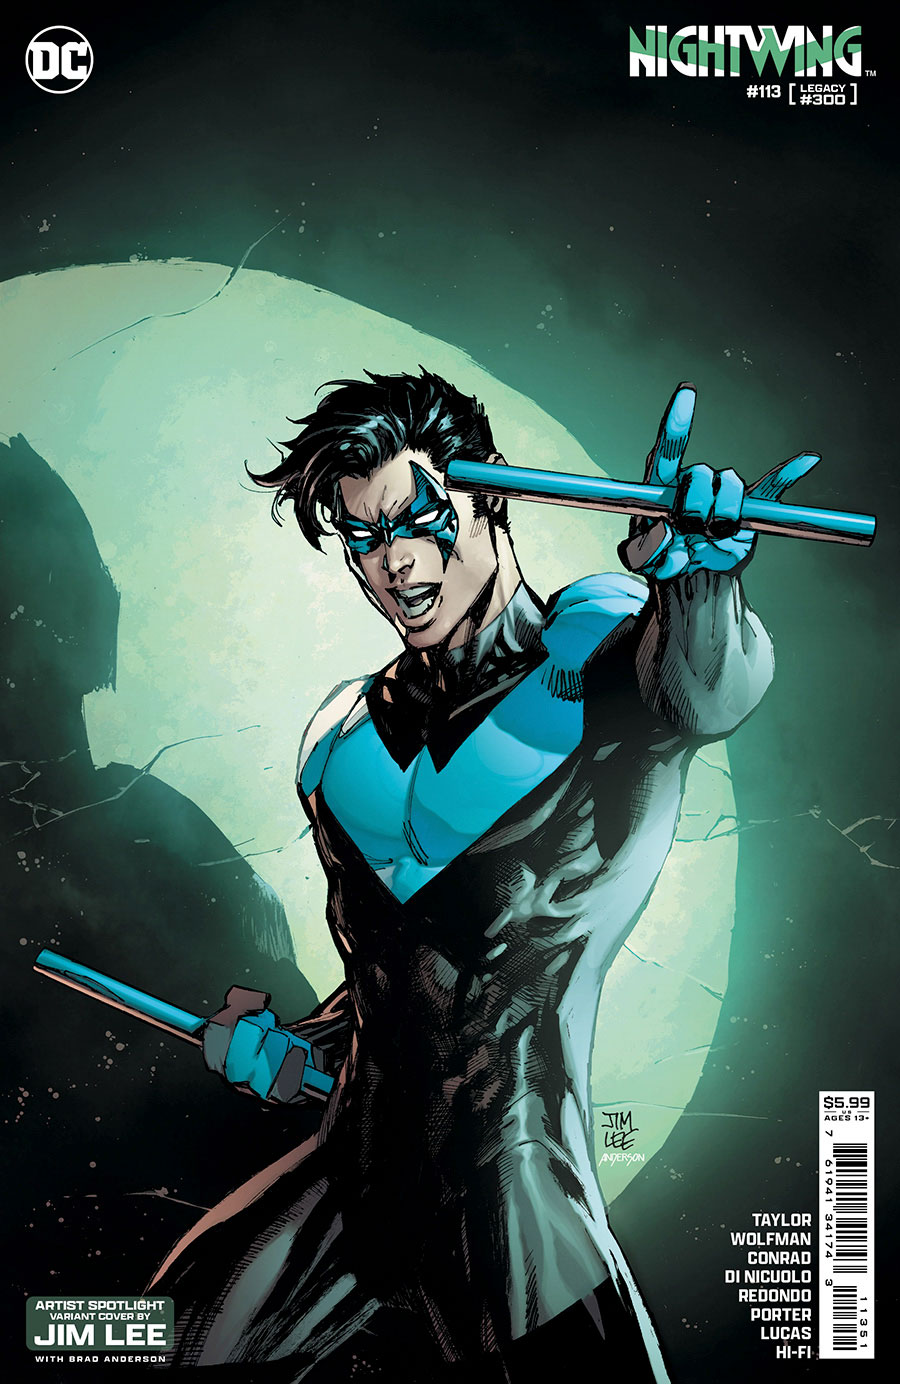 Nightwing Vol 4 #113 Cover E Variant Jim Lee Artist Spotlight Card Stock Cover (#300)